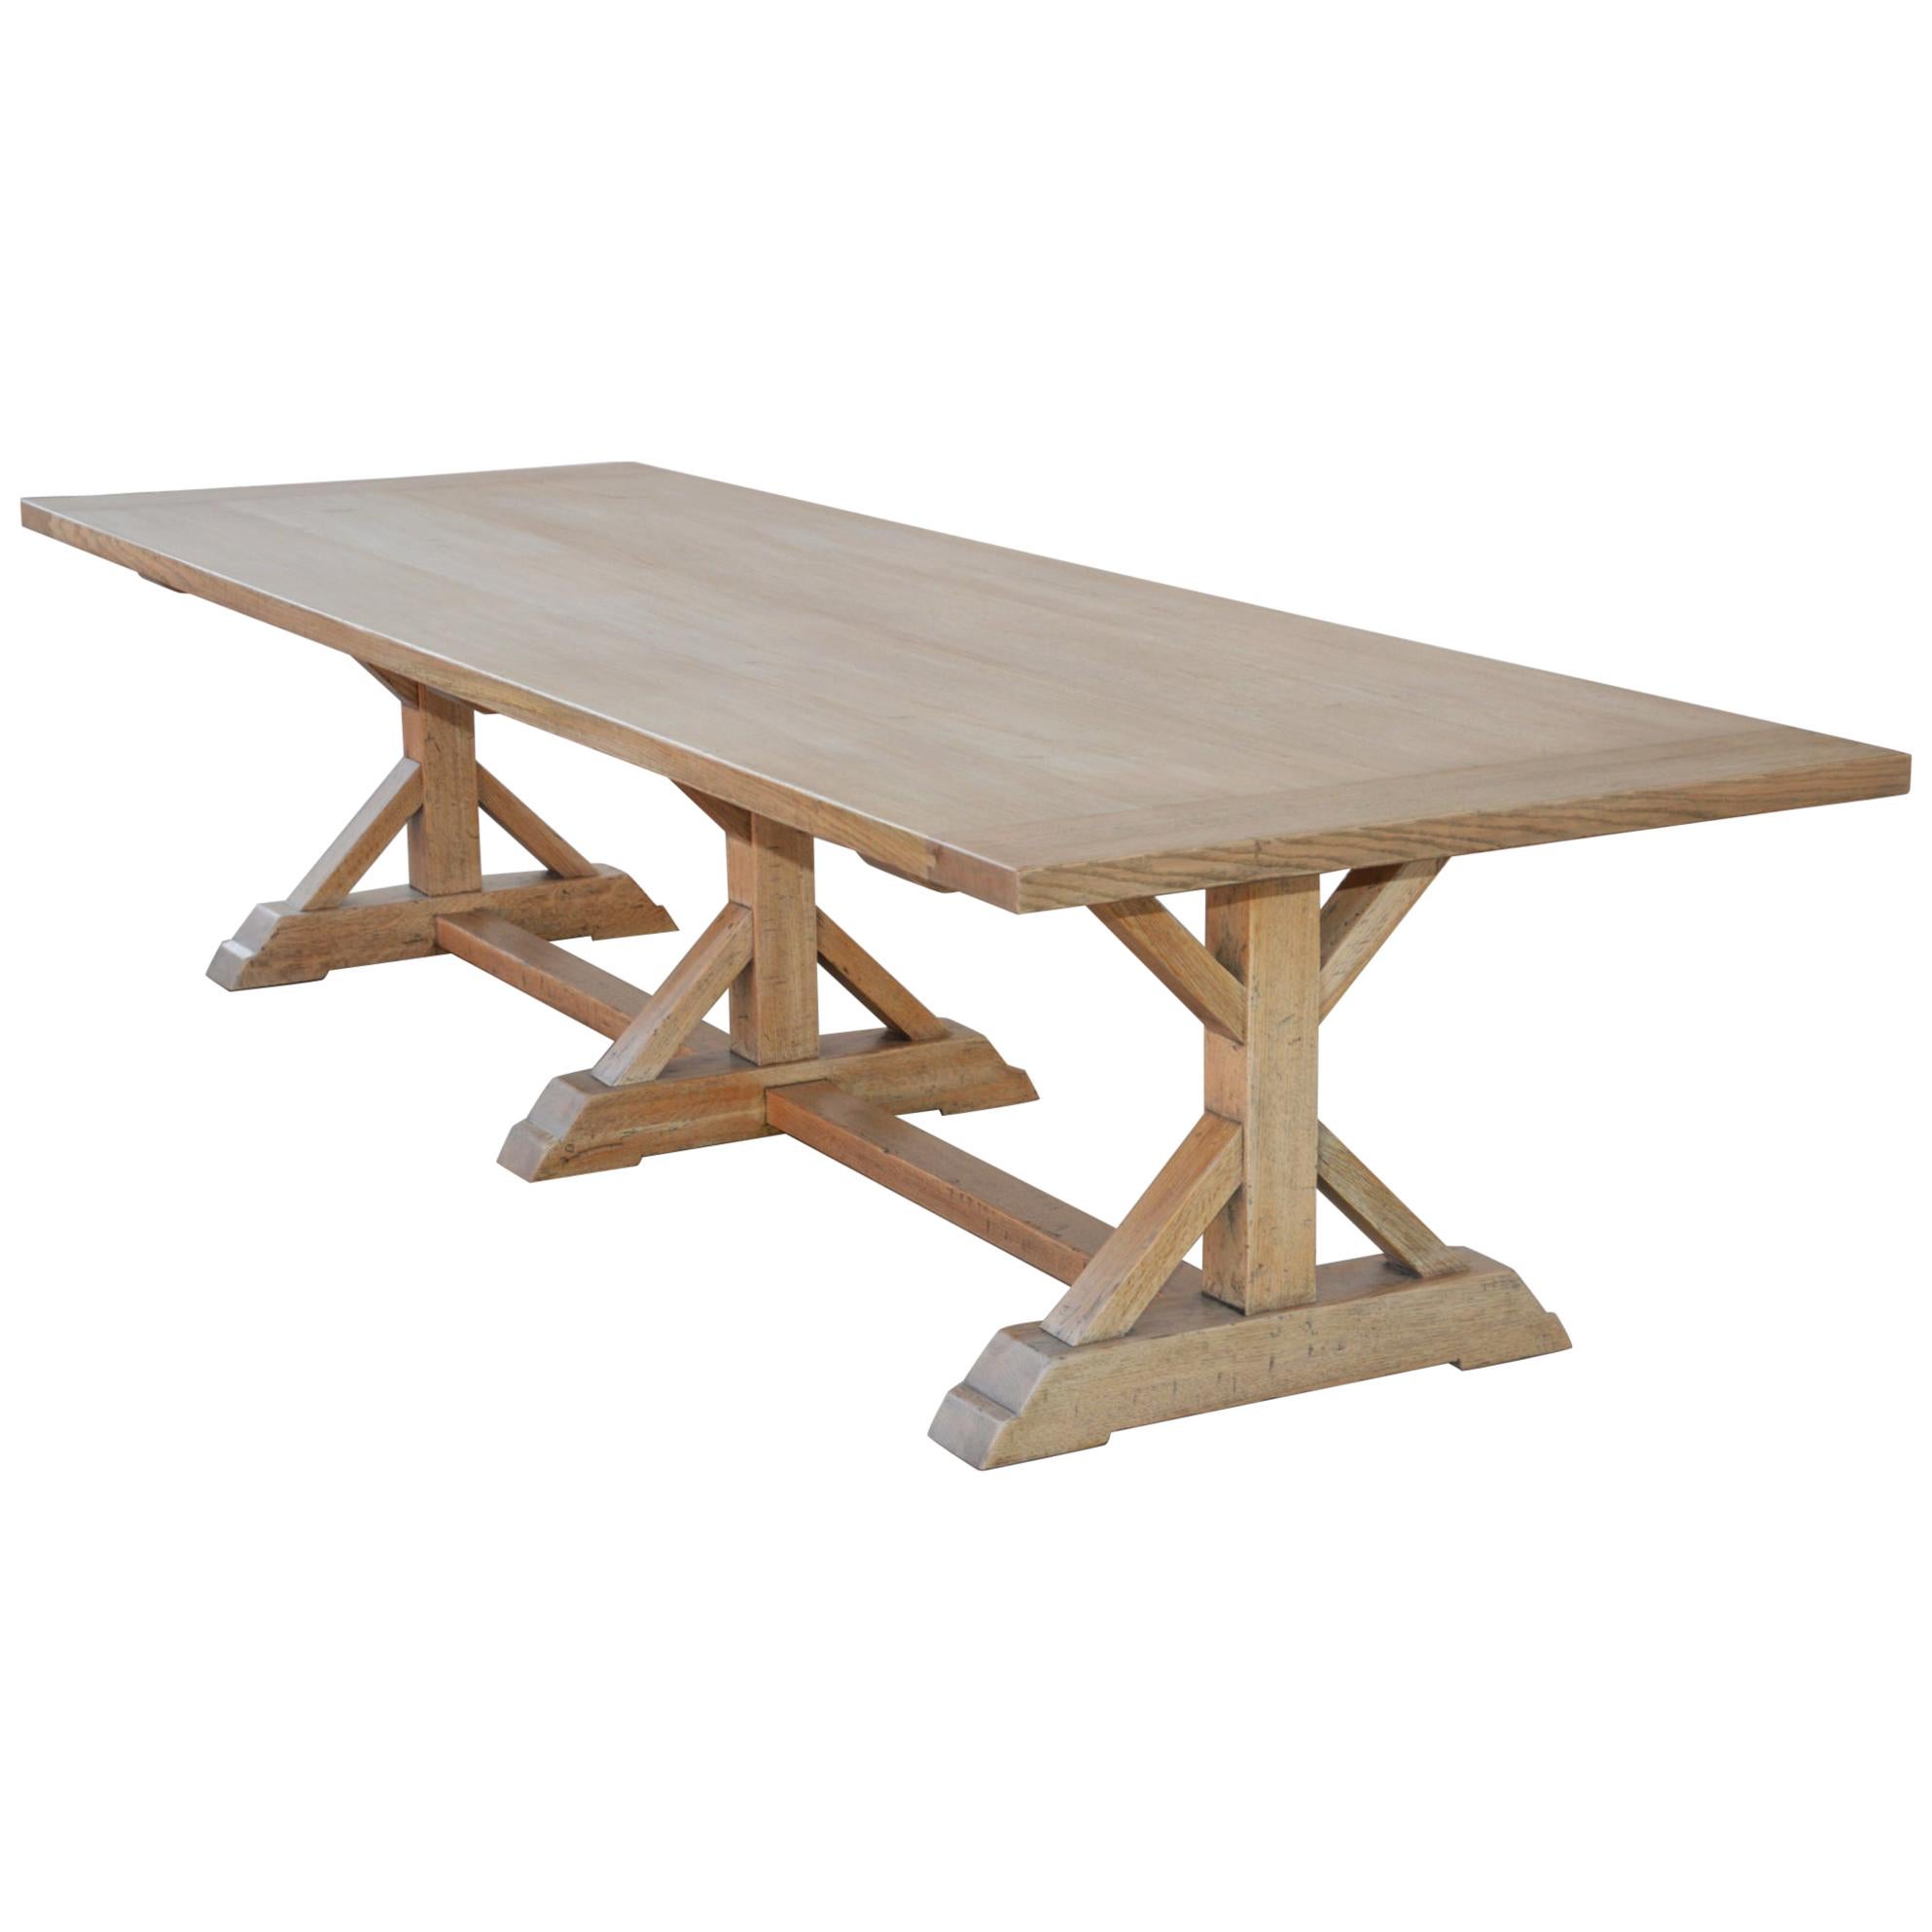 Custom Farm Table in White Oak, Built to Order by Petersen Antiques